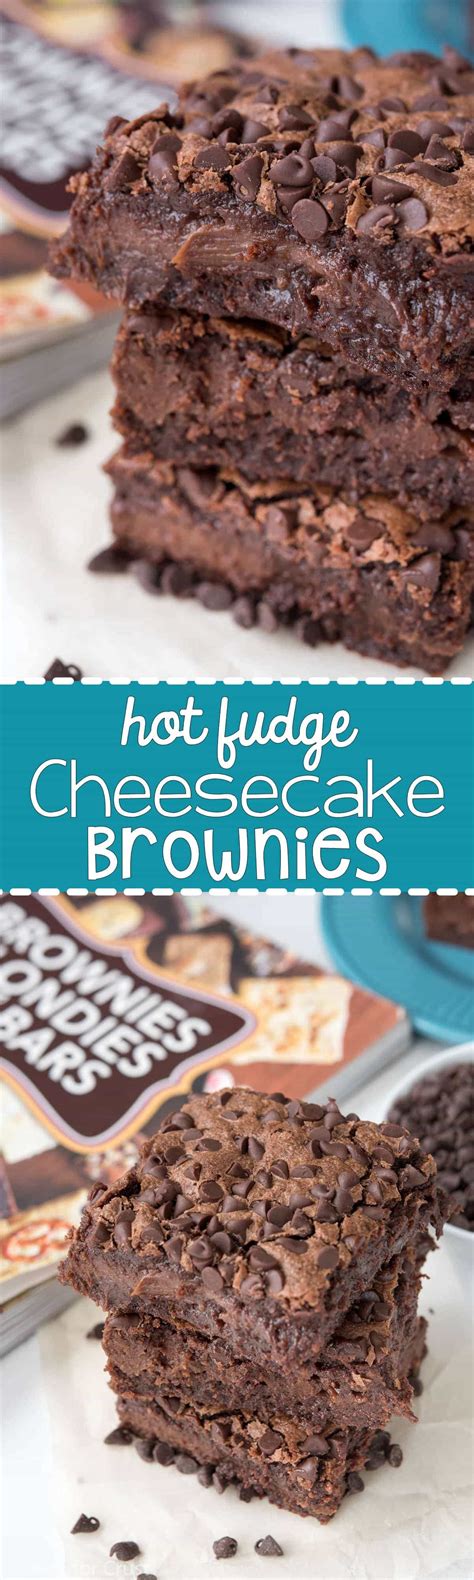 hot-fudge-cheesecake-brownies-crazy-for-crust image